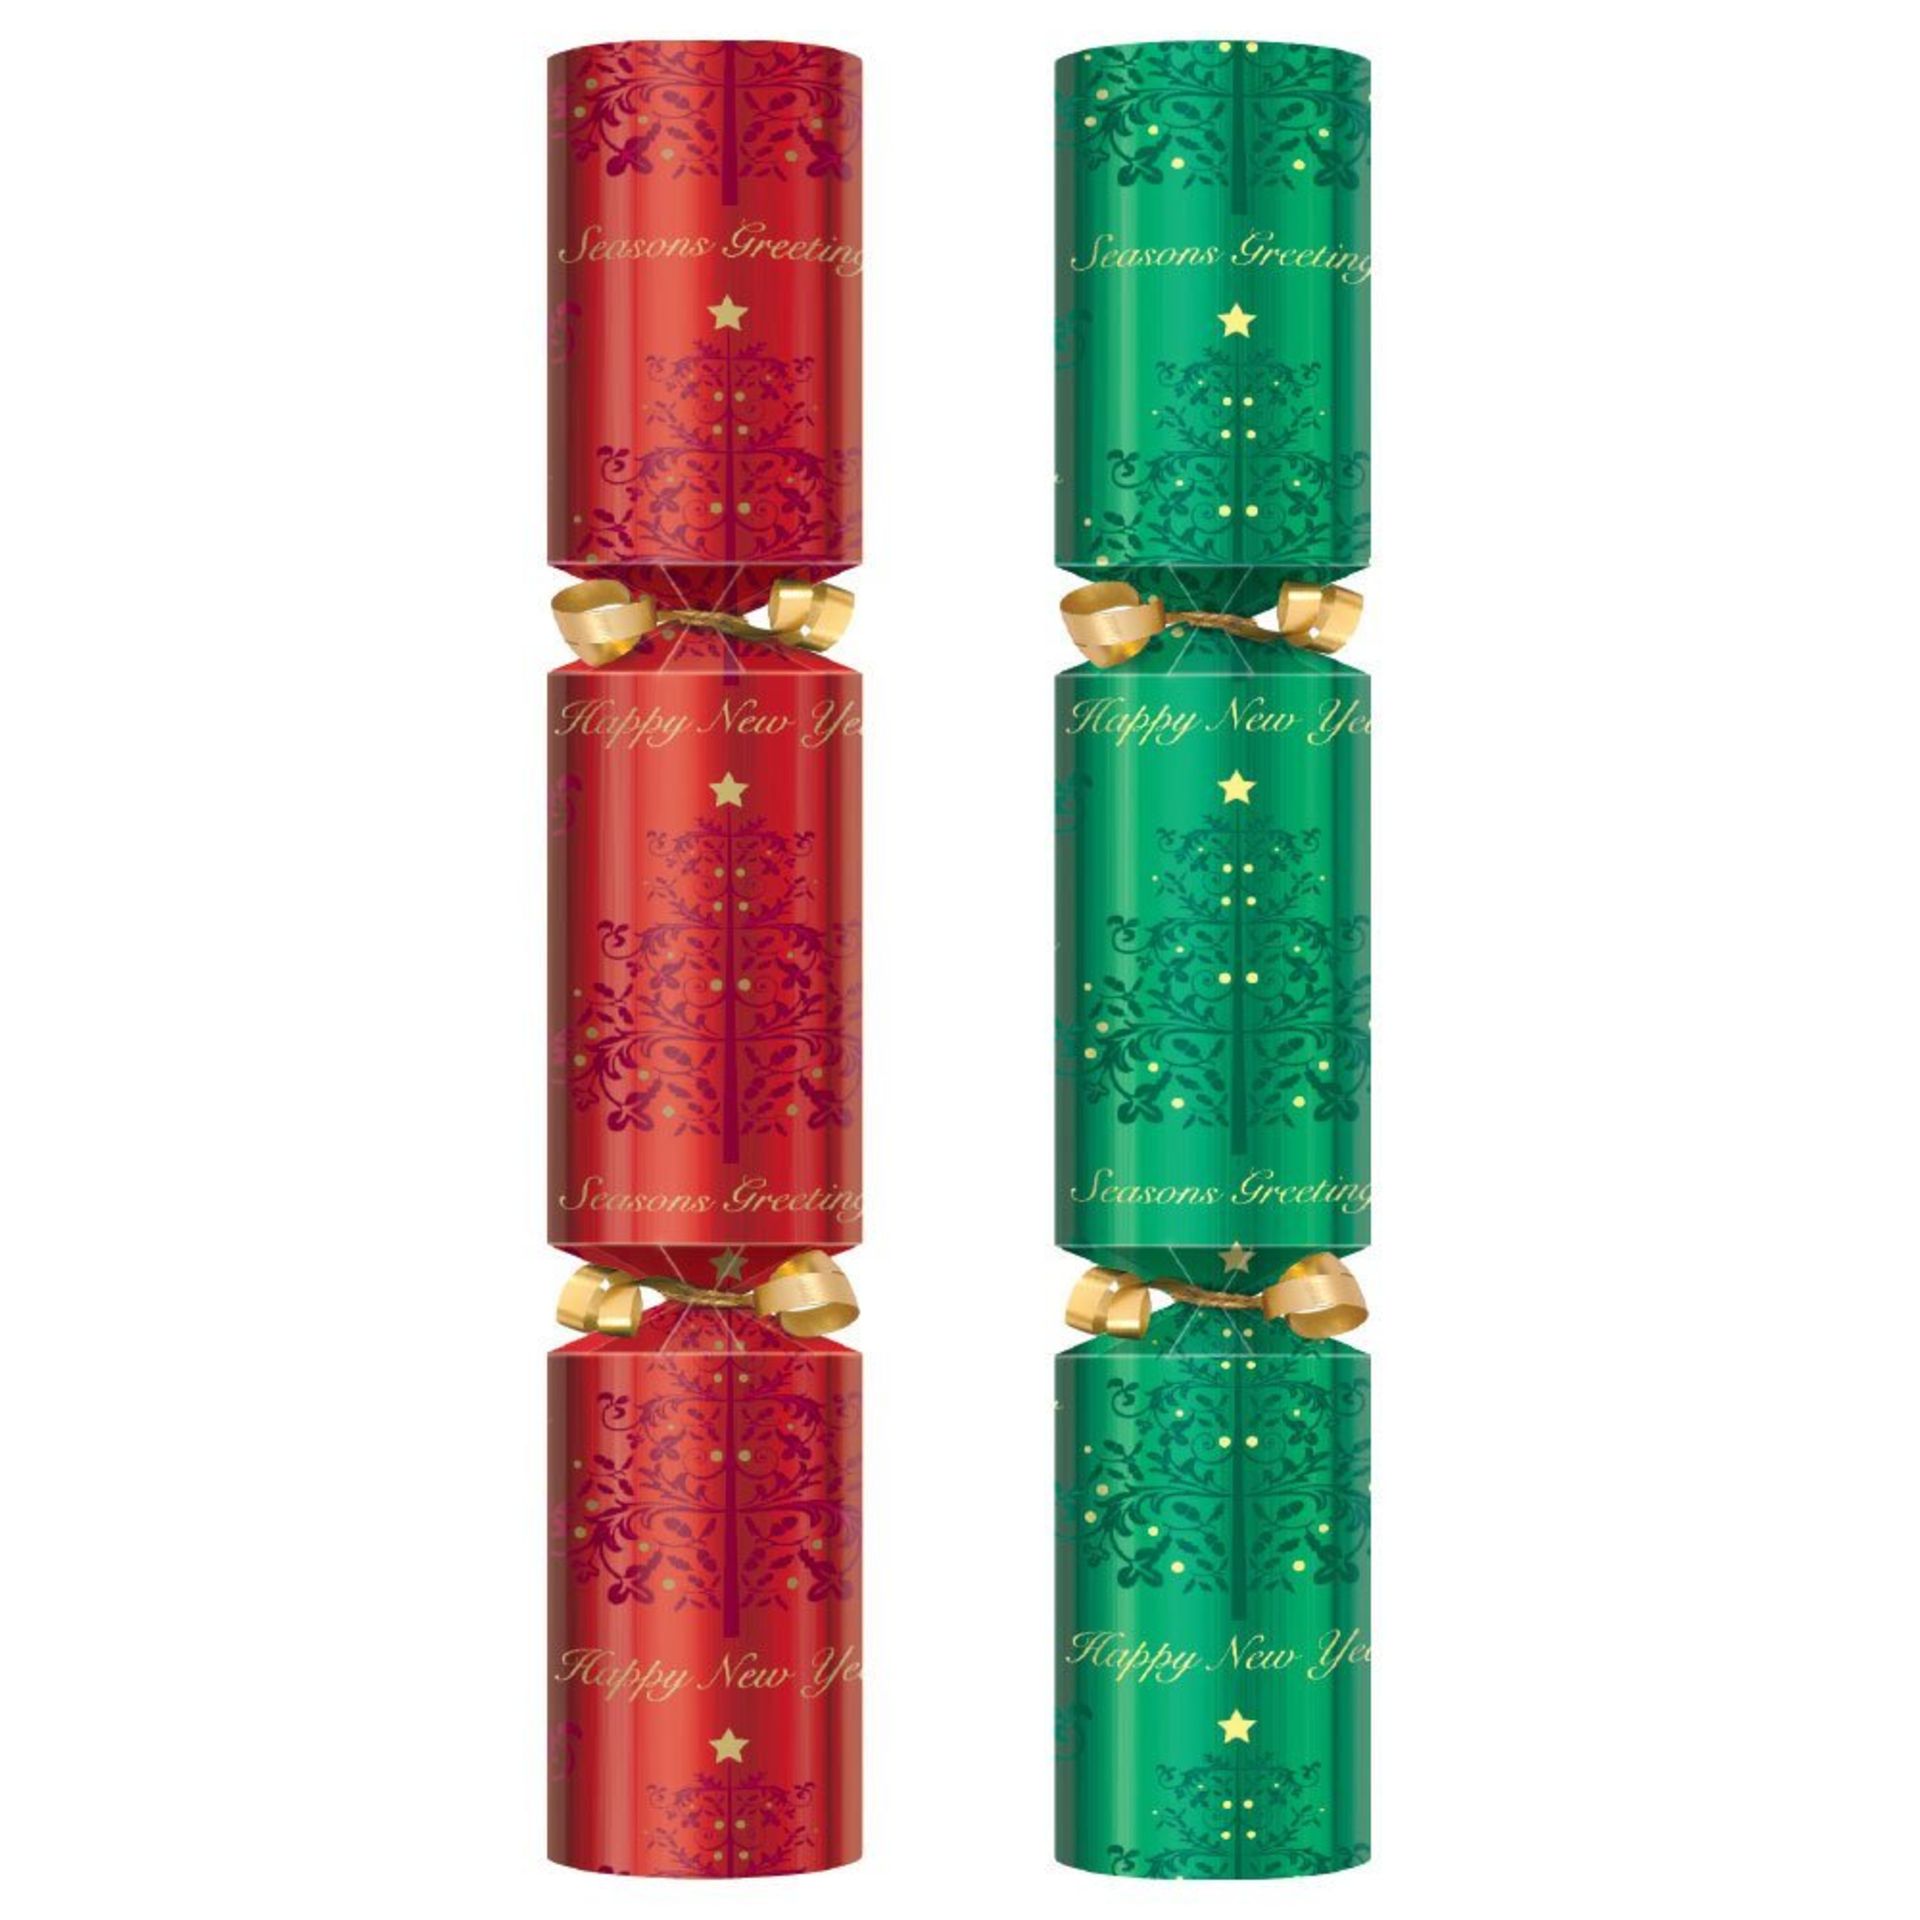 100 X Quality Swantex Christmas Crackers - Red & Green Holly Swirl. One box of Large Christmas